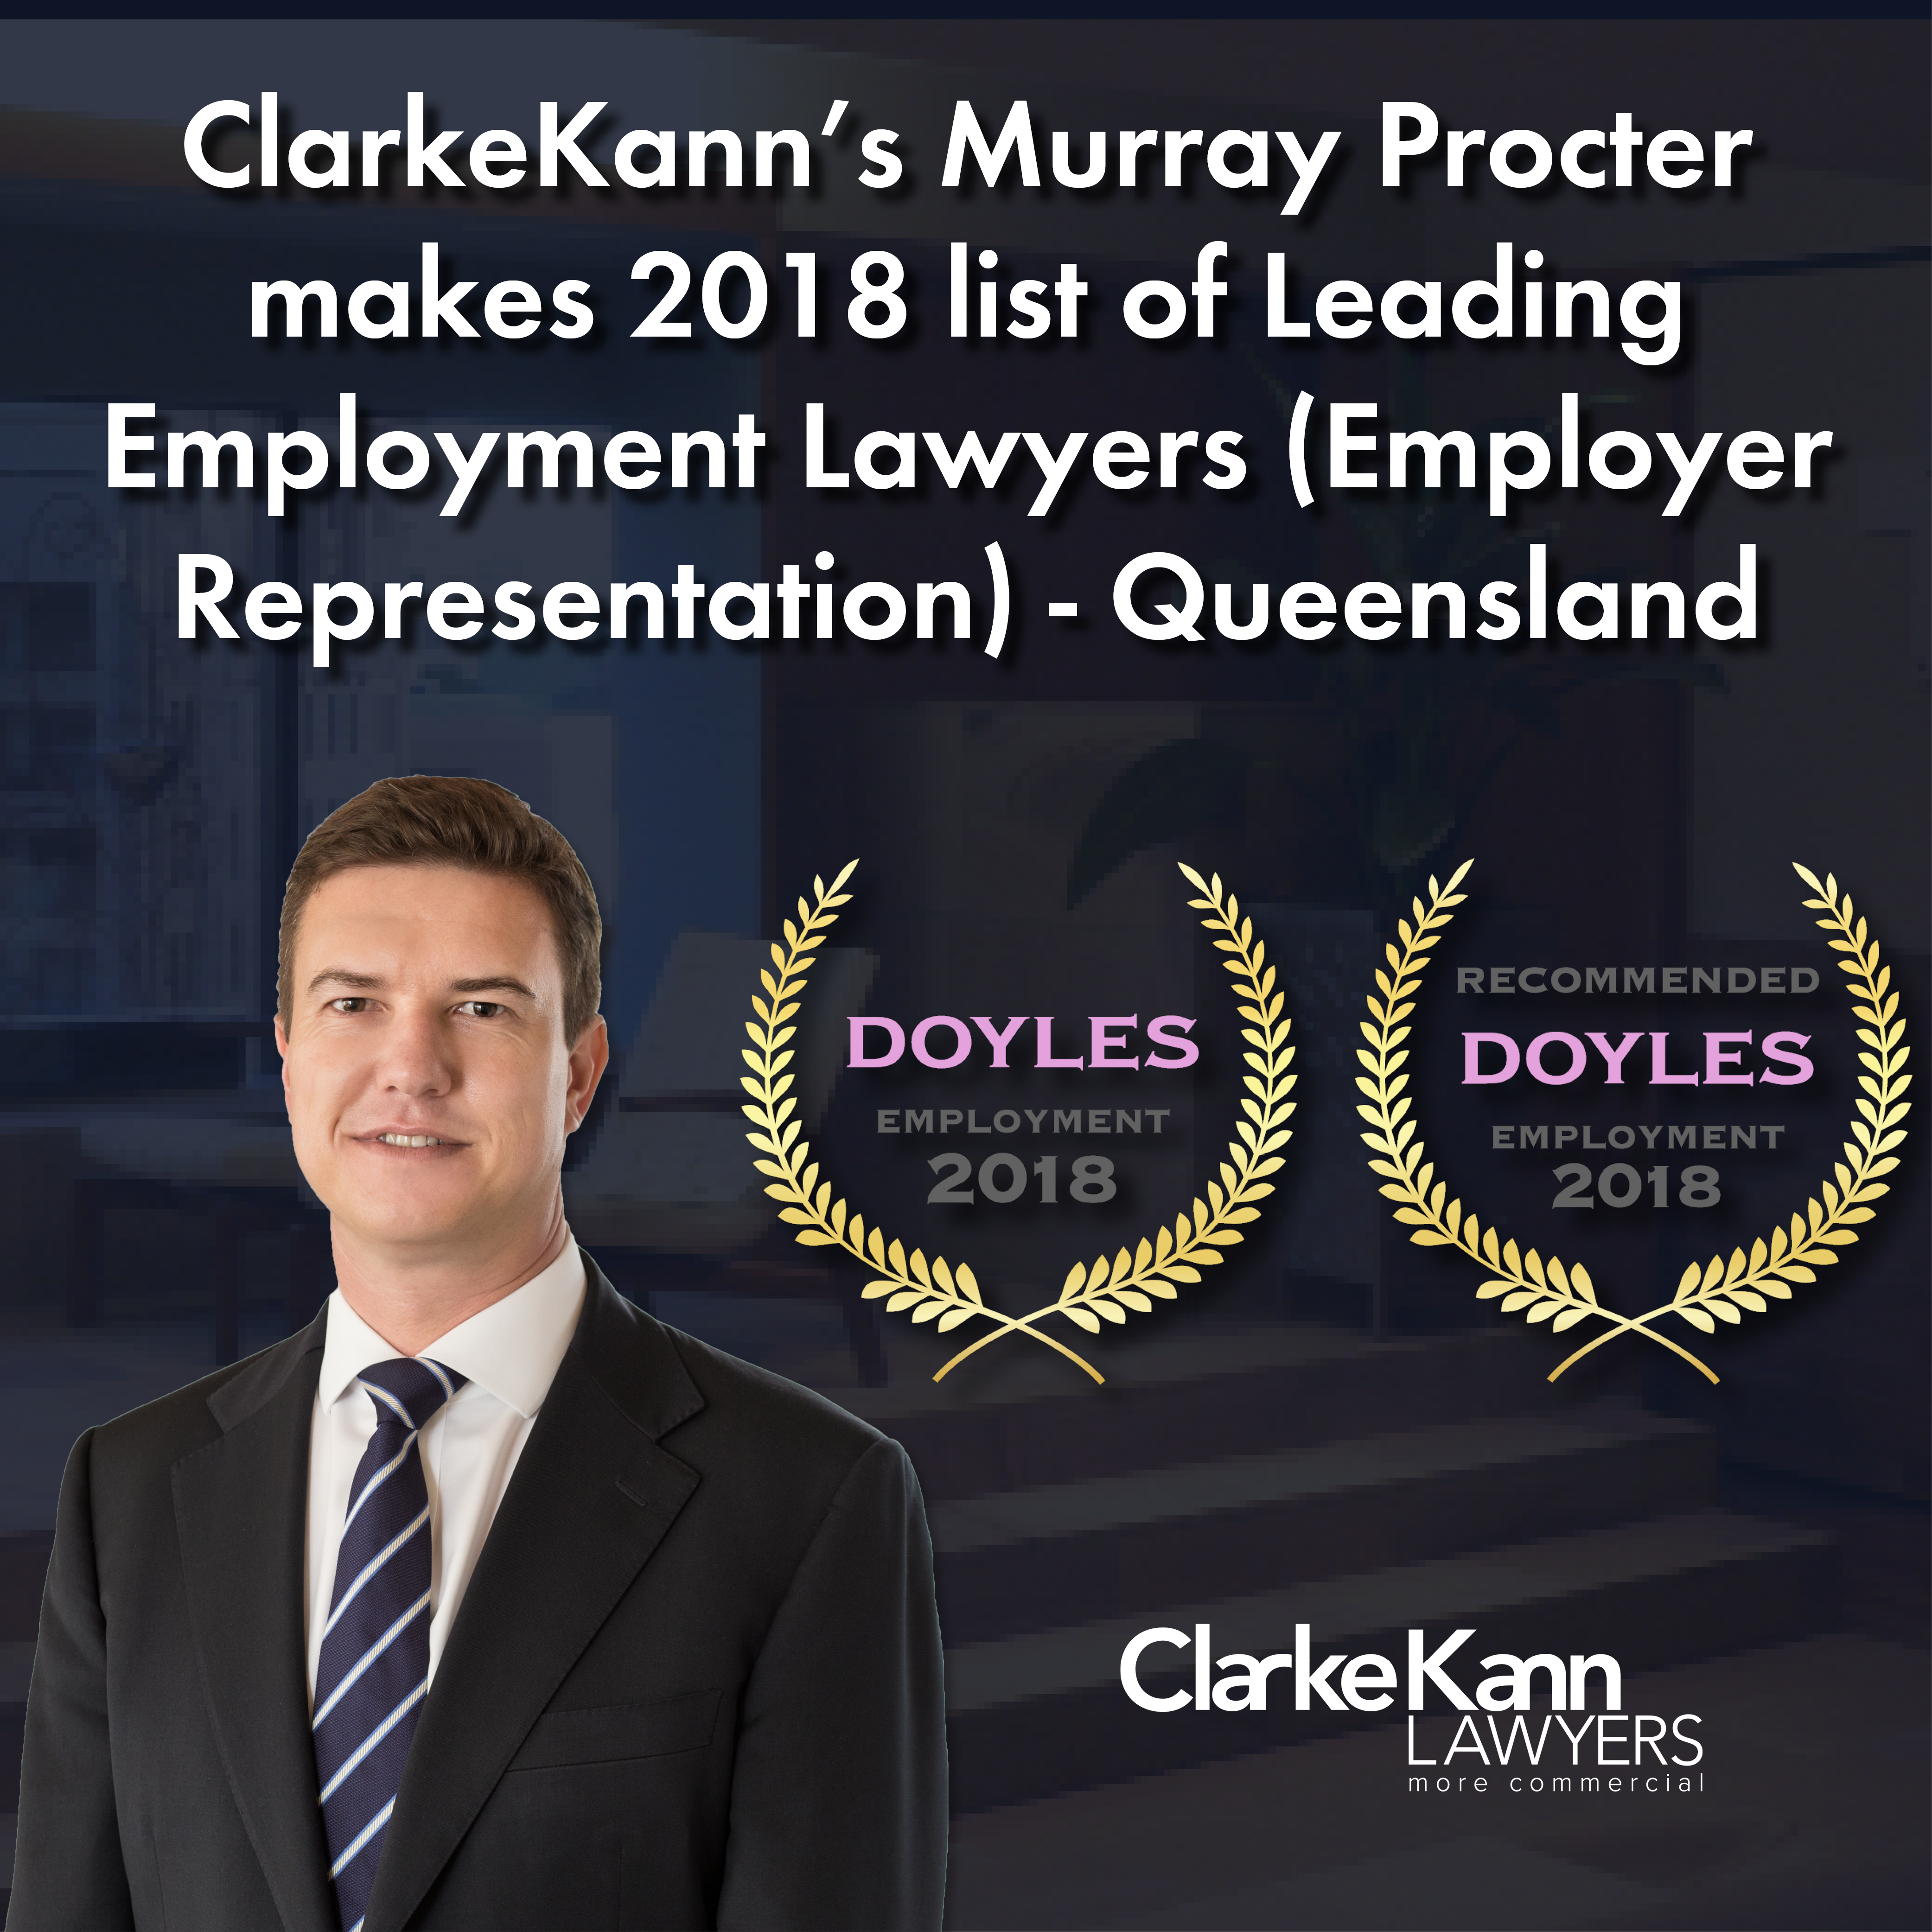 ANNOUNCEMENT: ClarkeKann’s Murray Procter named in 2018 Doyle’s Guide